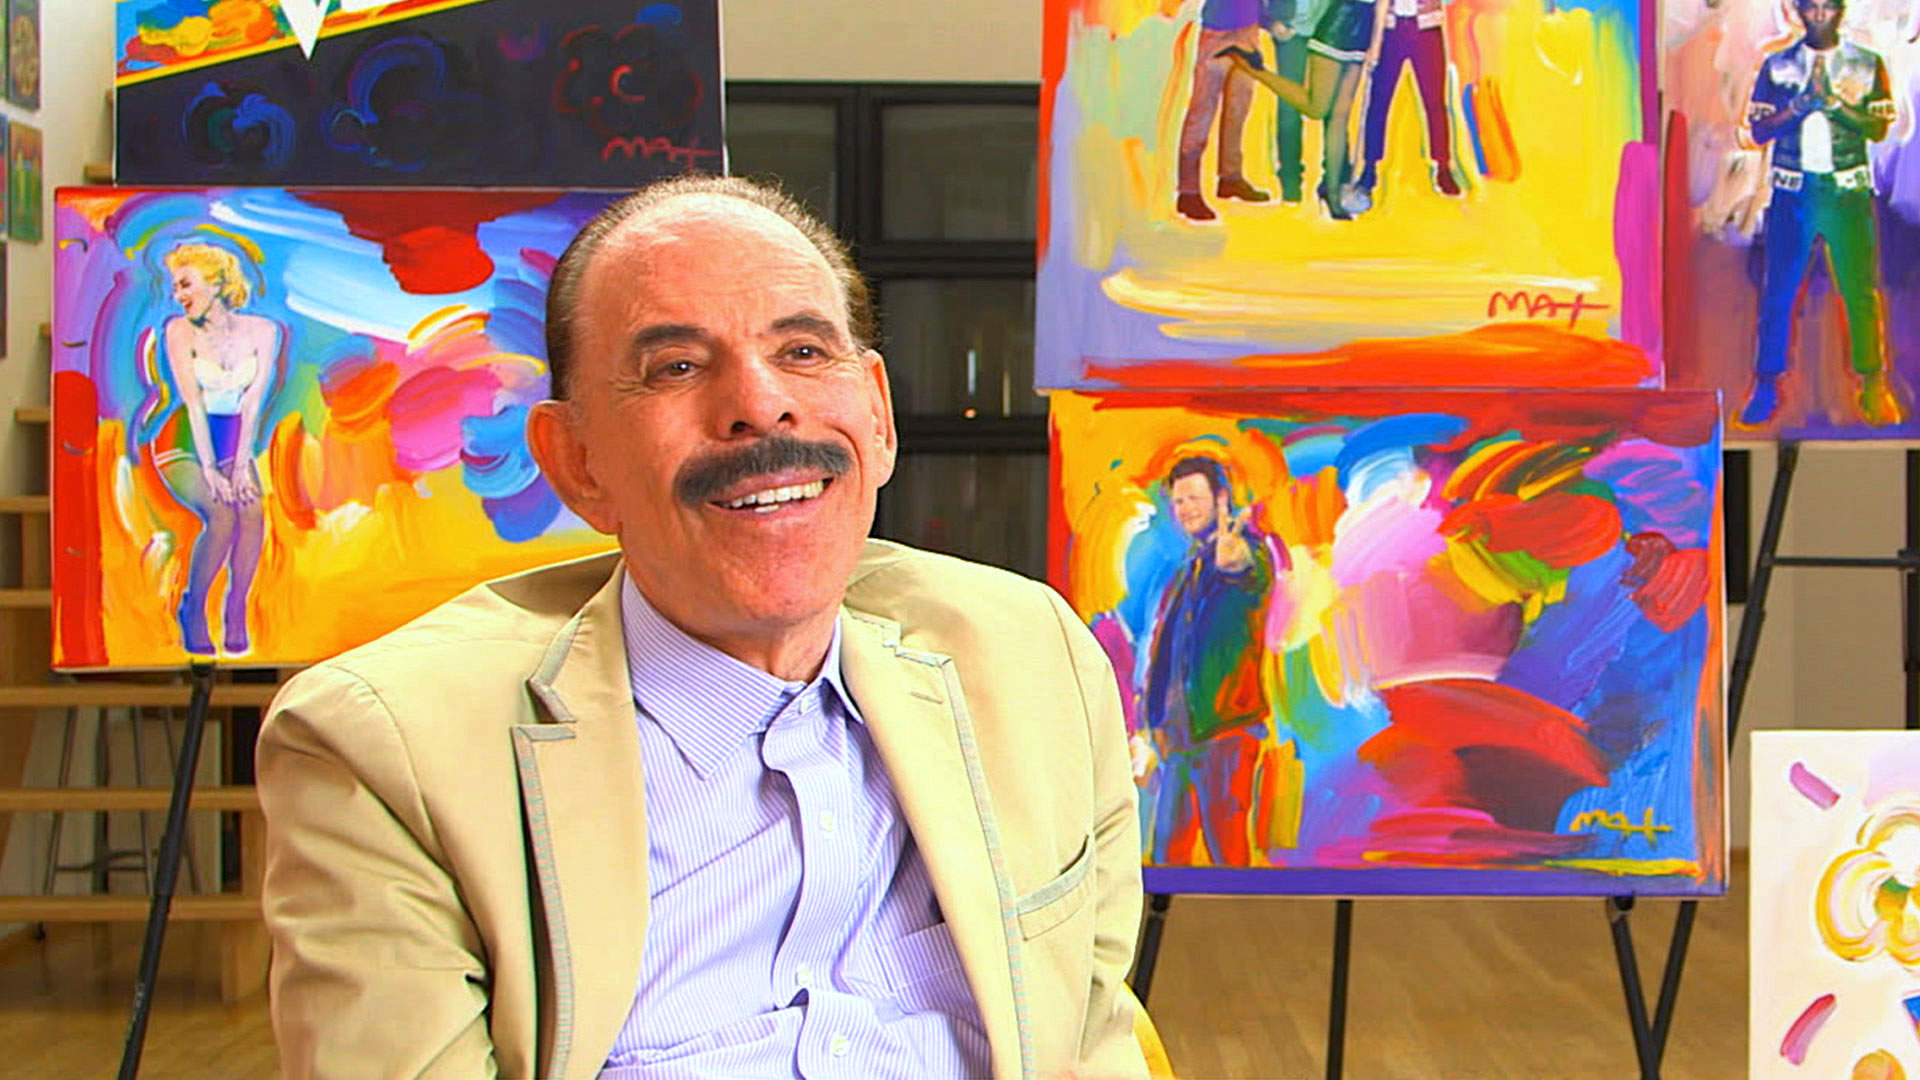 Watch The Voice Interview: Peter Max Brings His Color to The Voice